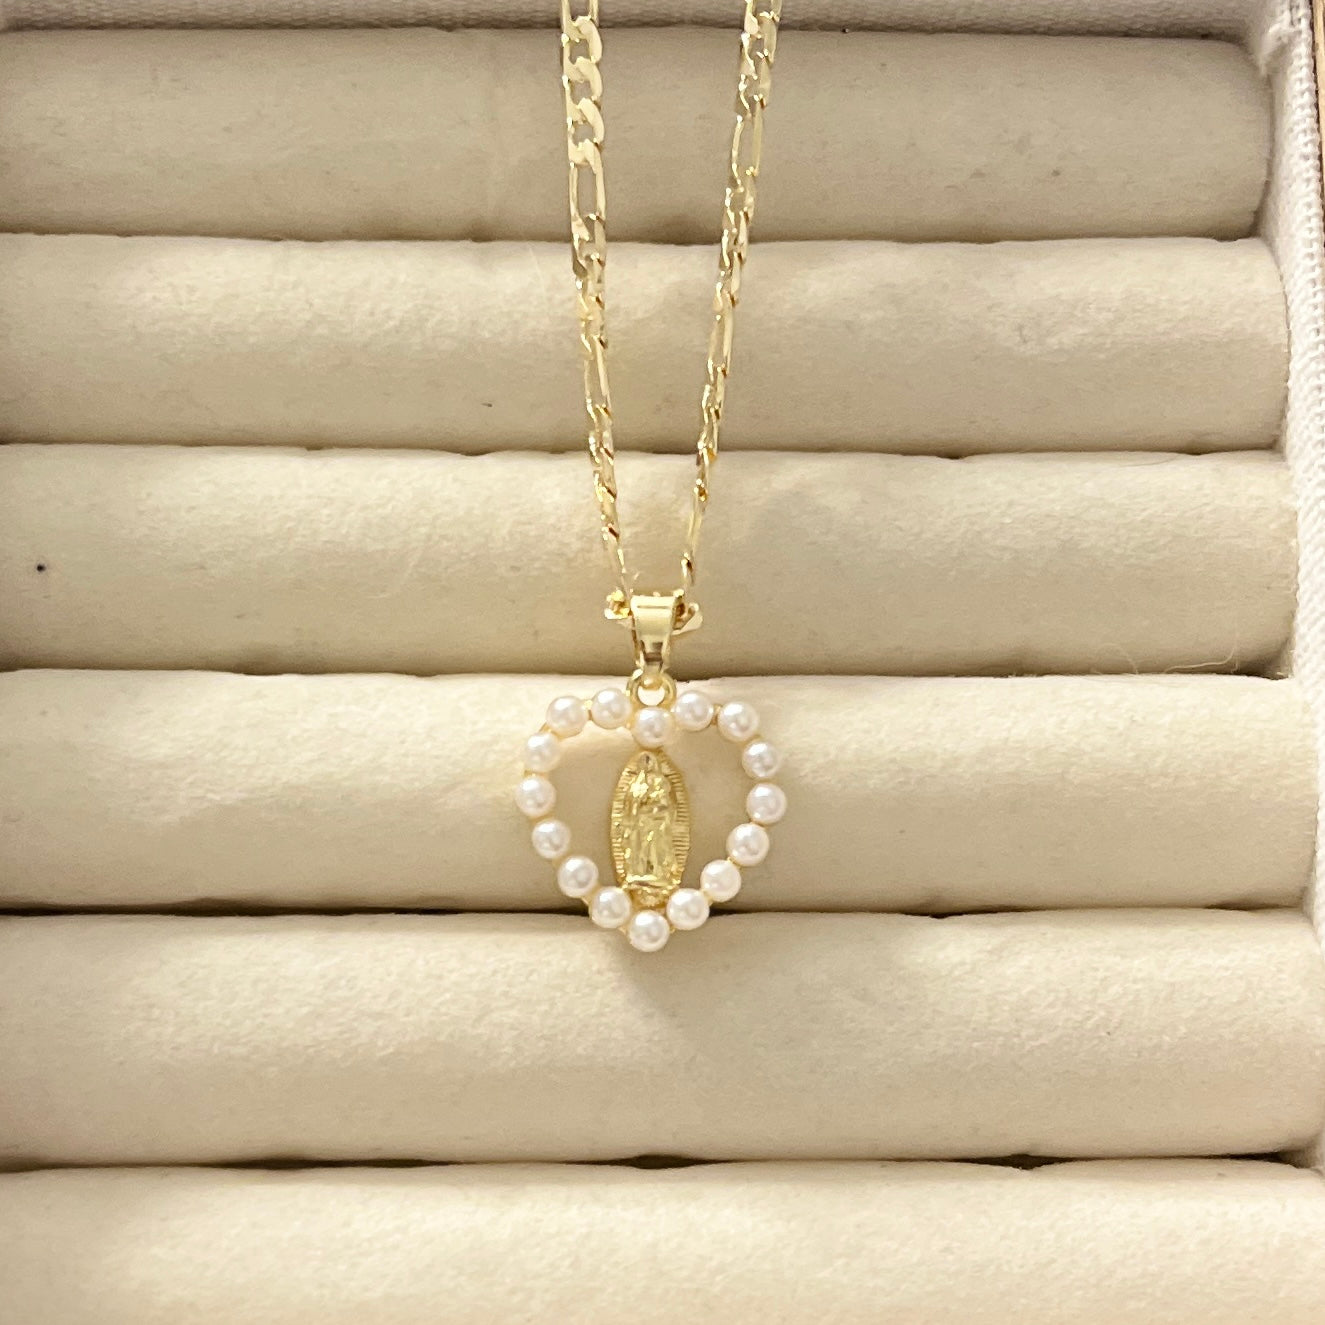 Dainty Guadalupana Pearl Love Necklace